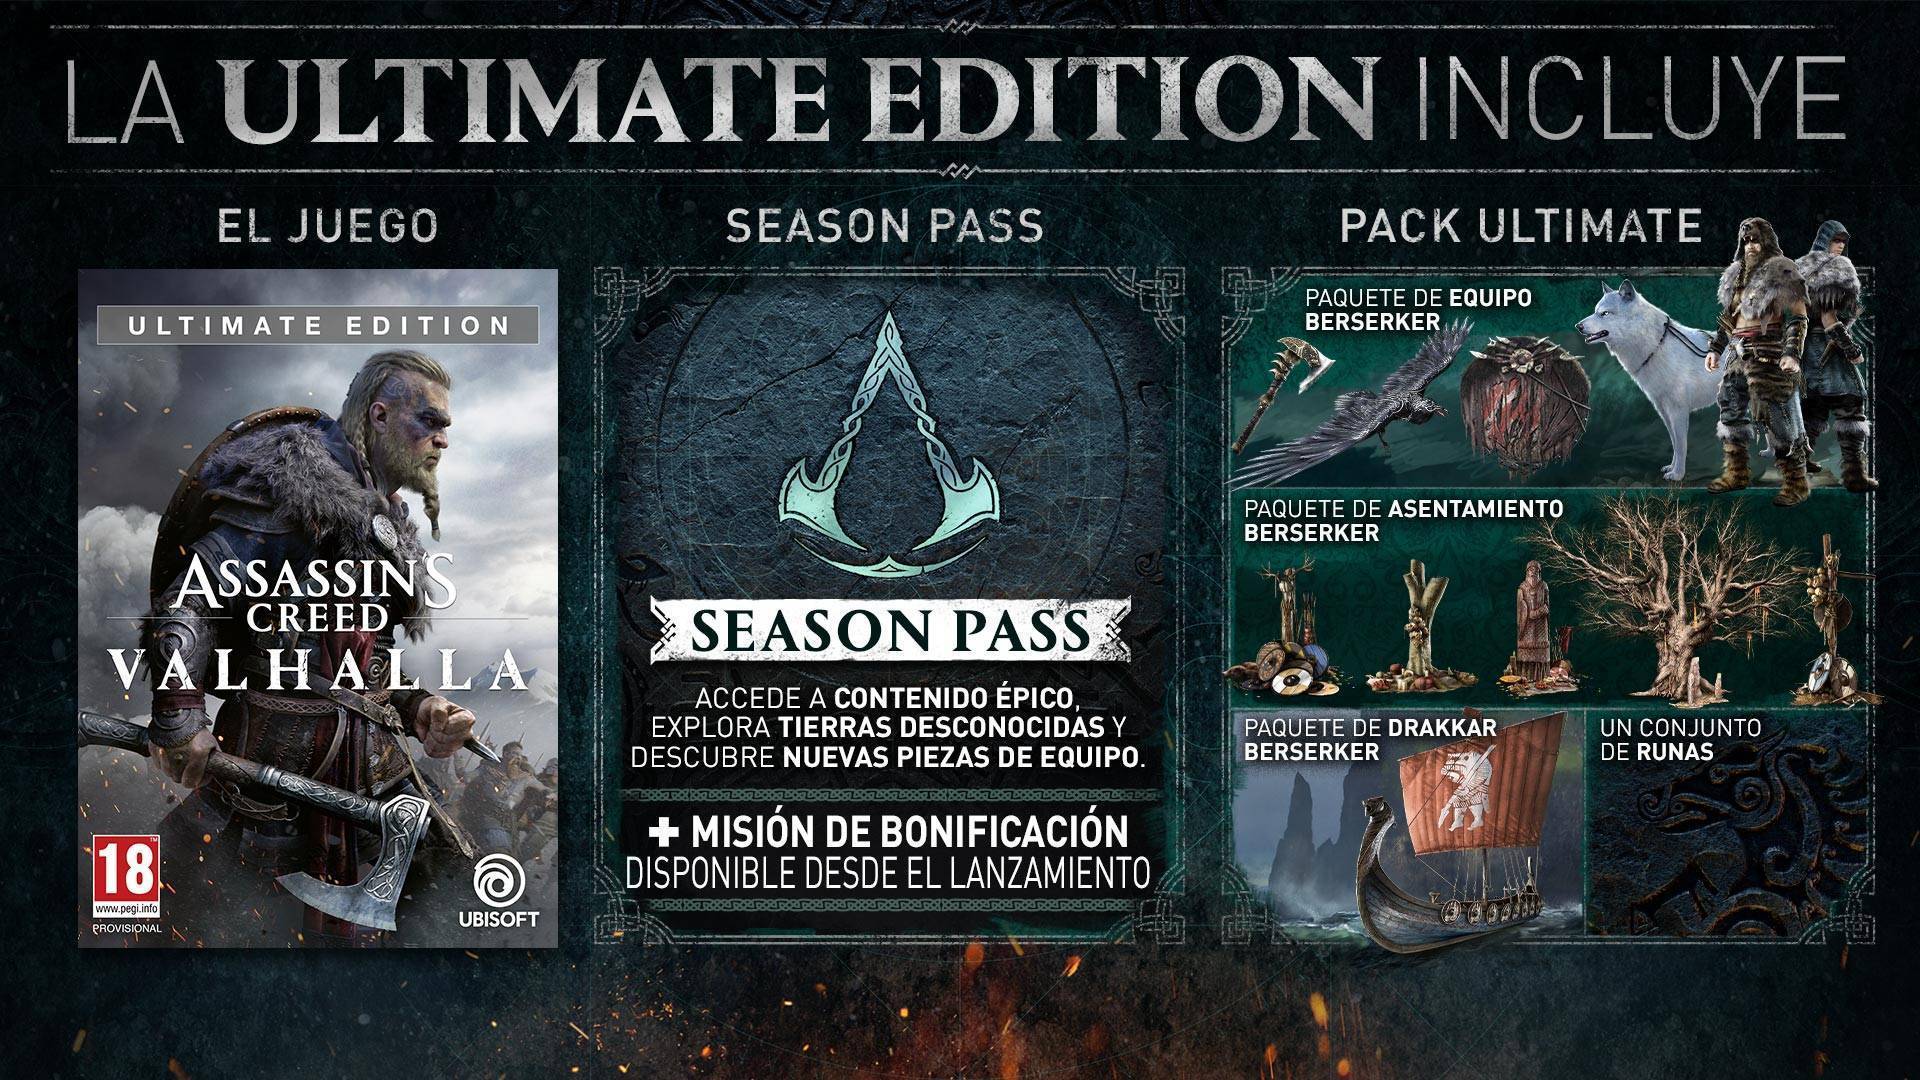 Assassins Creed Valhalla: Season Pass (PC) Key cheap - Price of for Uplay